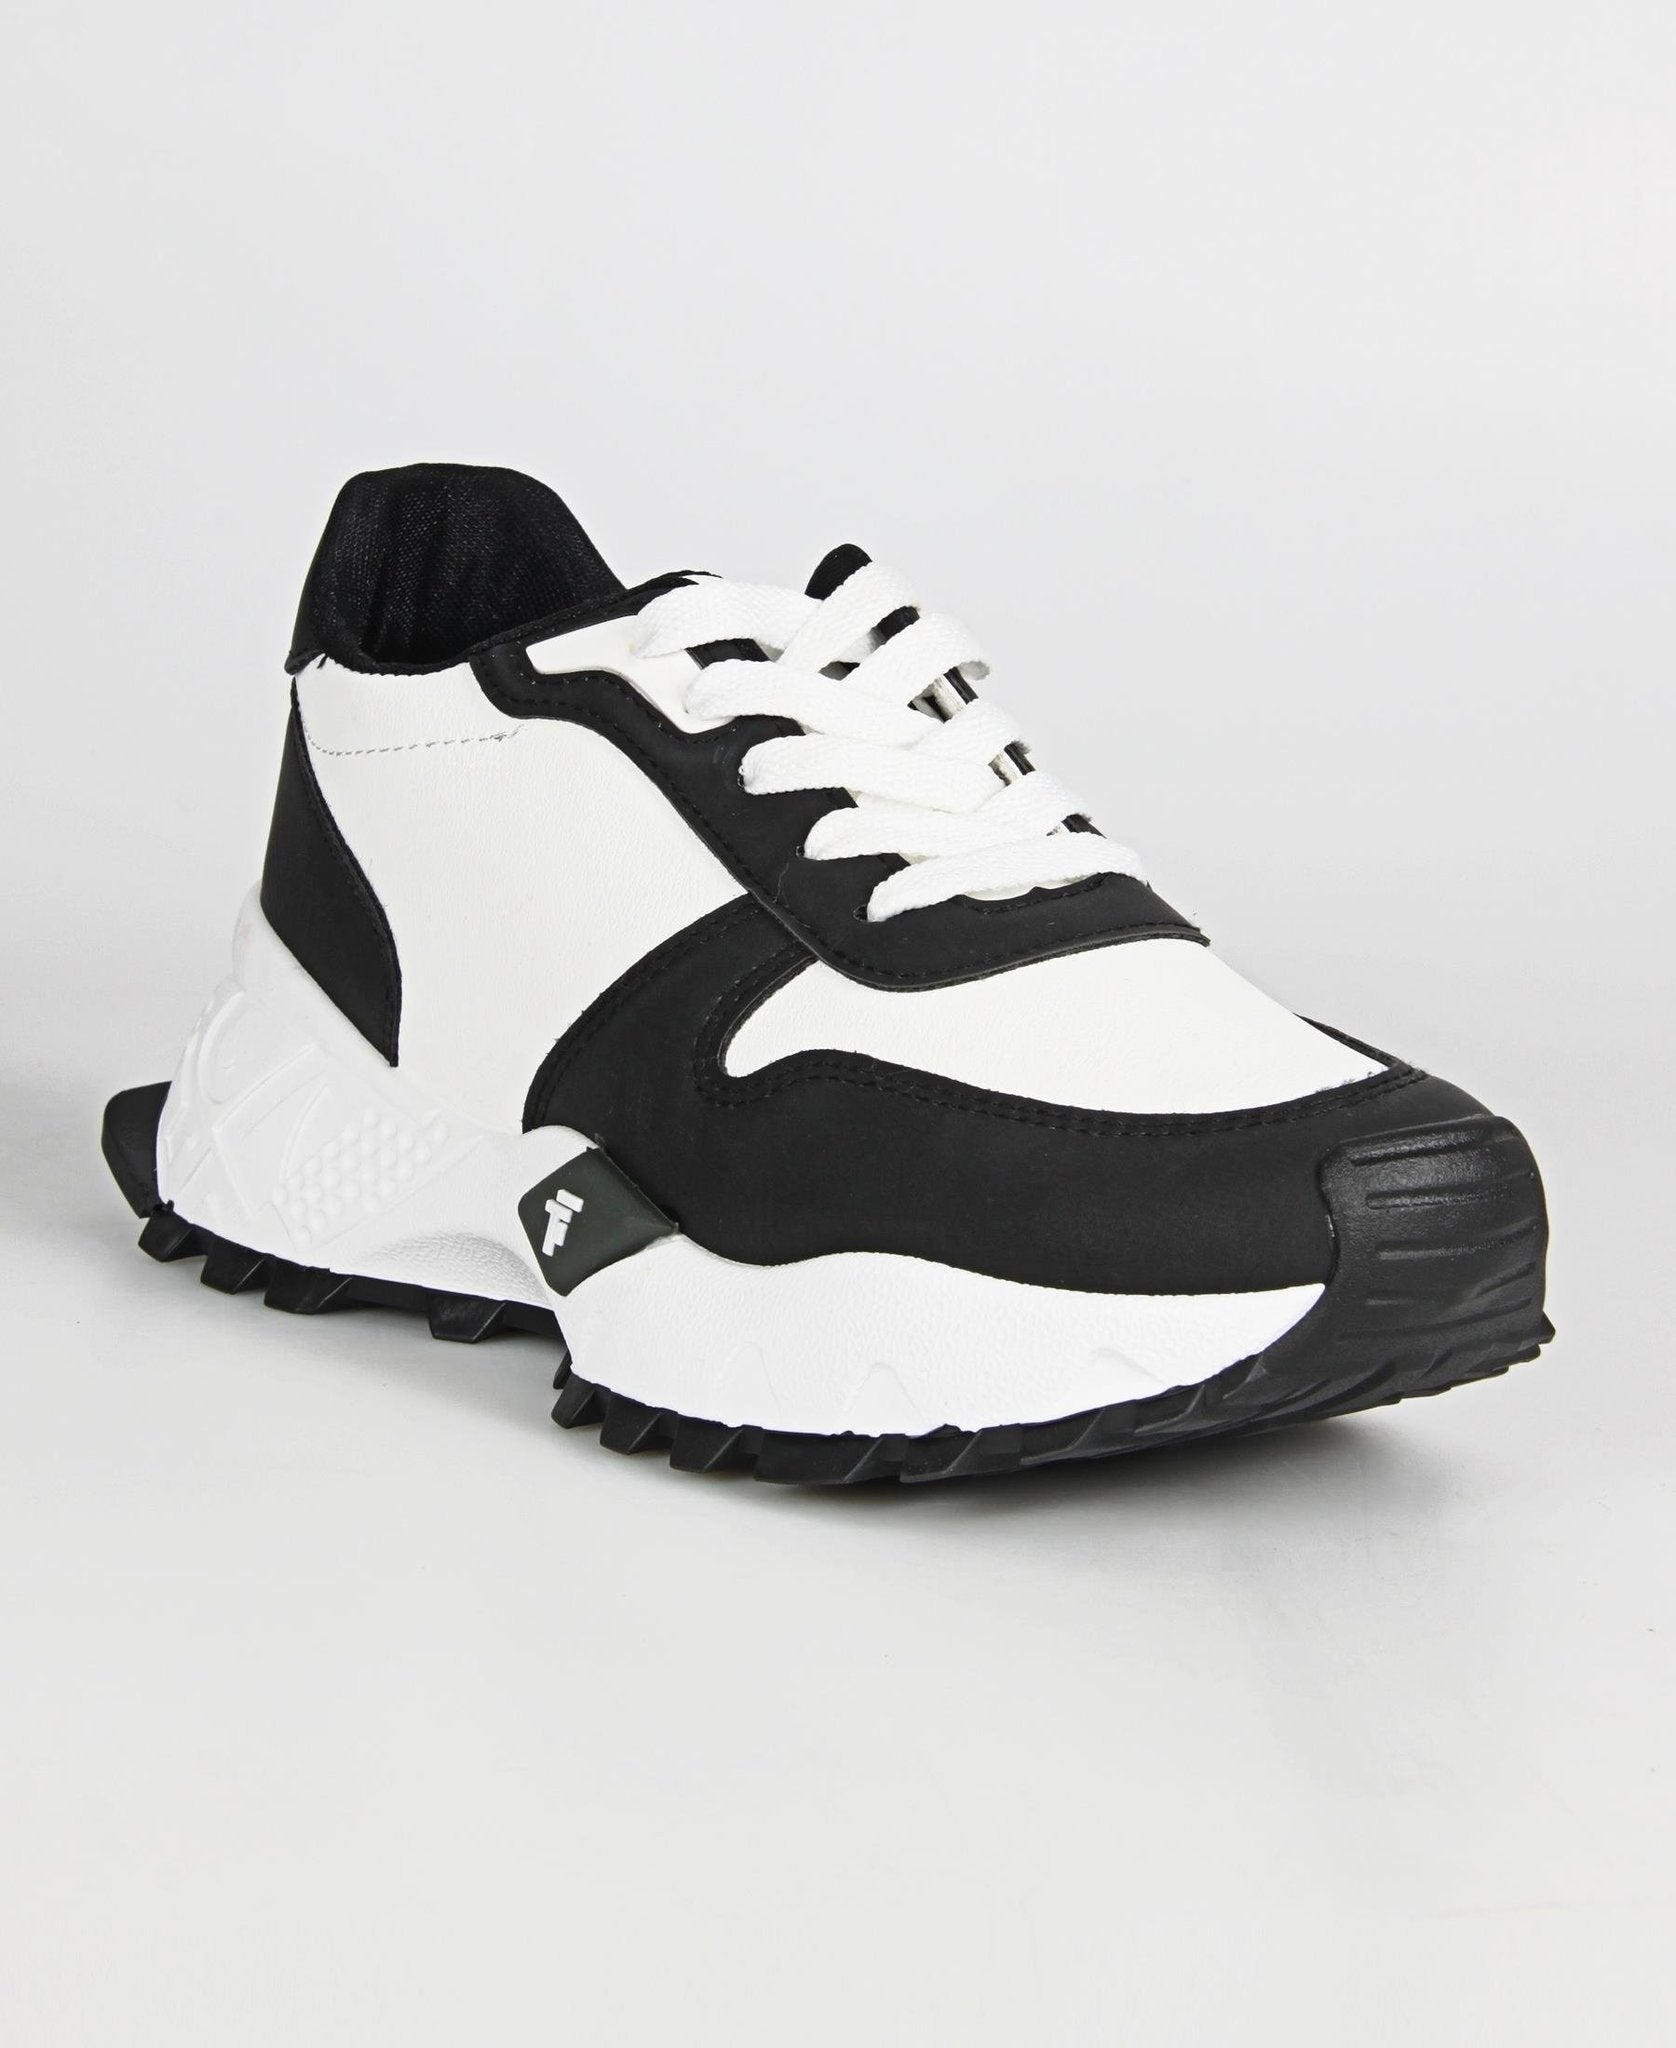 LADIES BLACK-WHITE CASUAL SNEAKERS - BOOTS